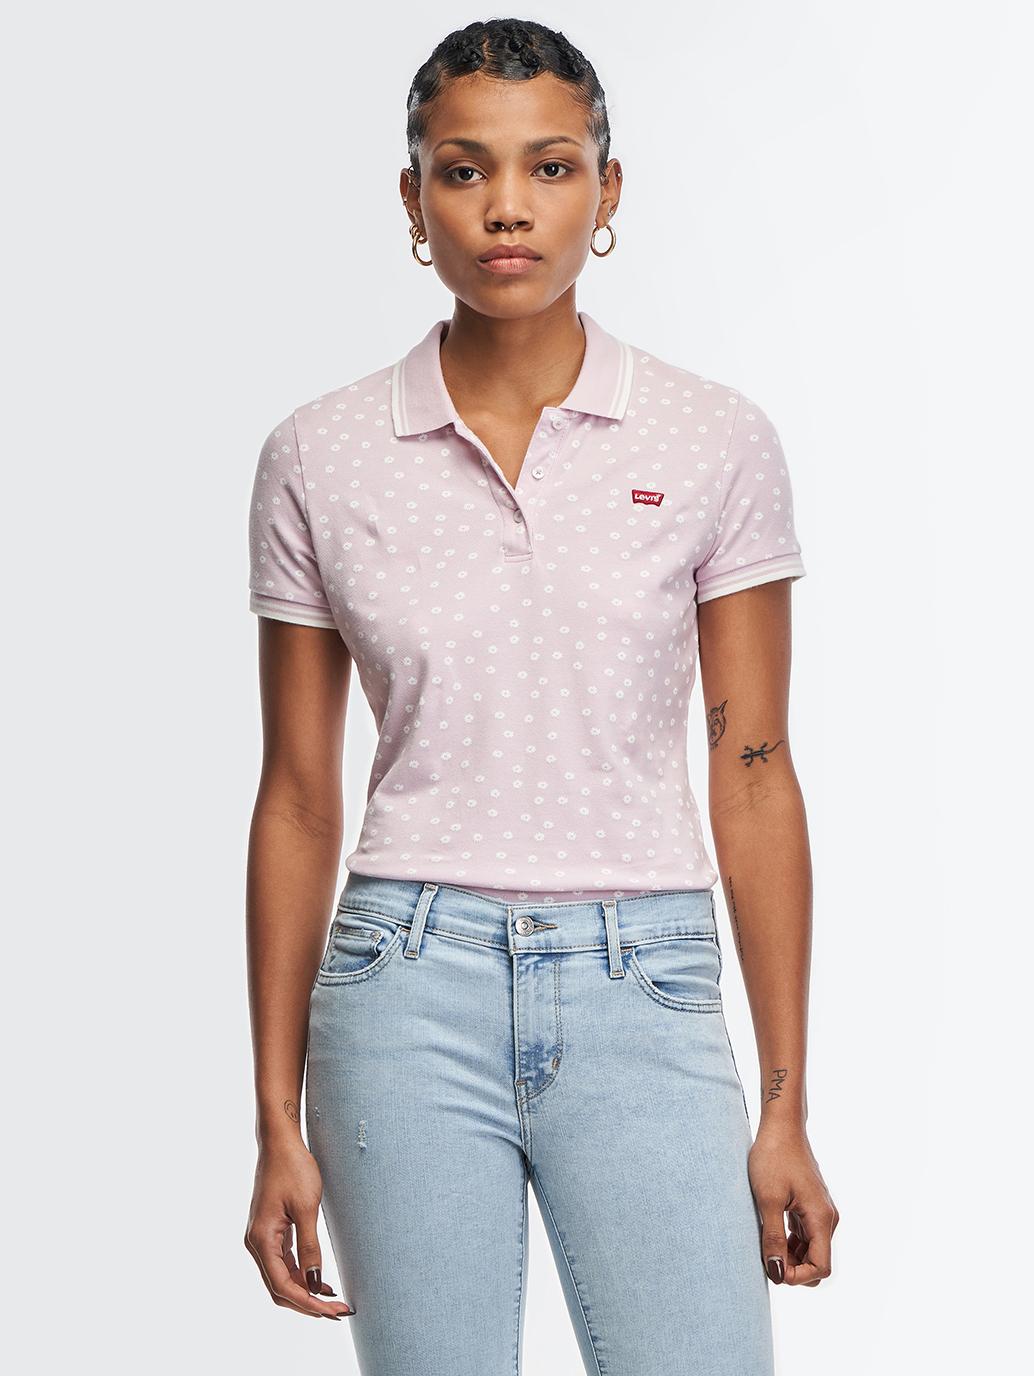 levis malaysia womens slim polo shirt 525990049 10 Model Front